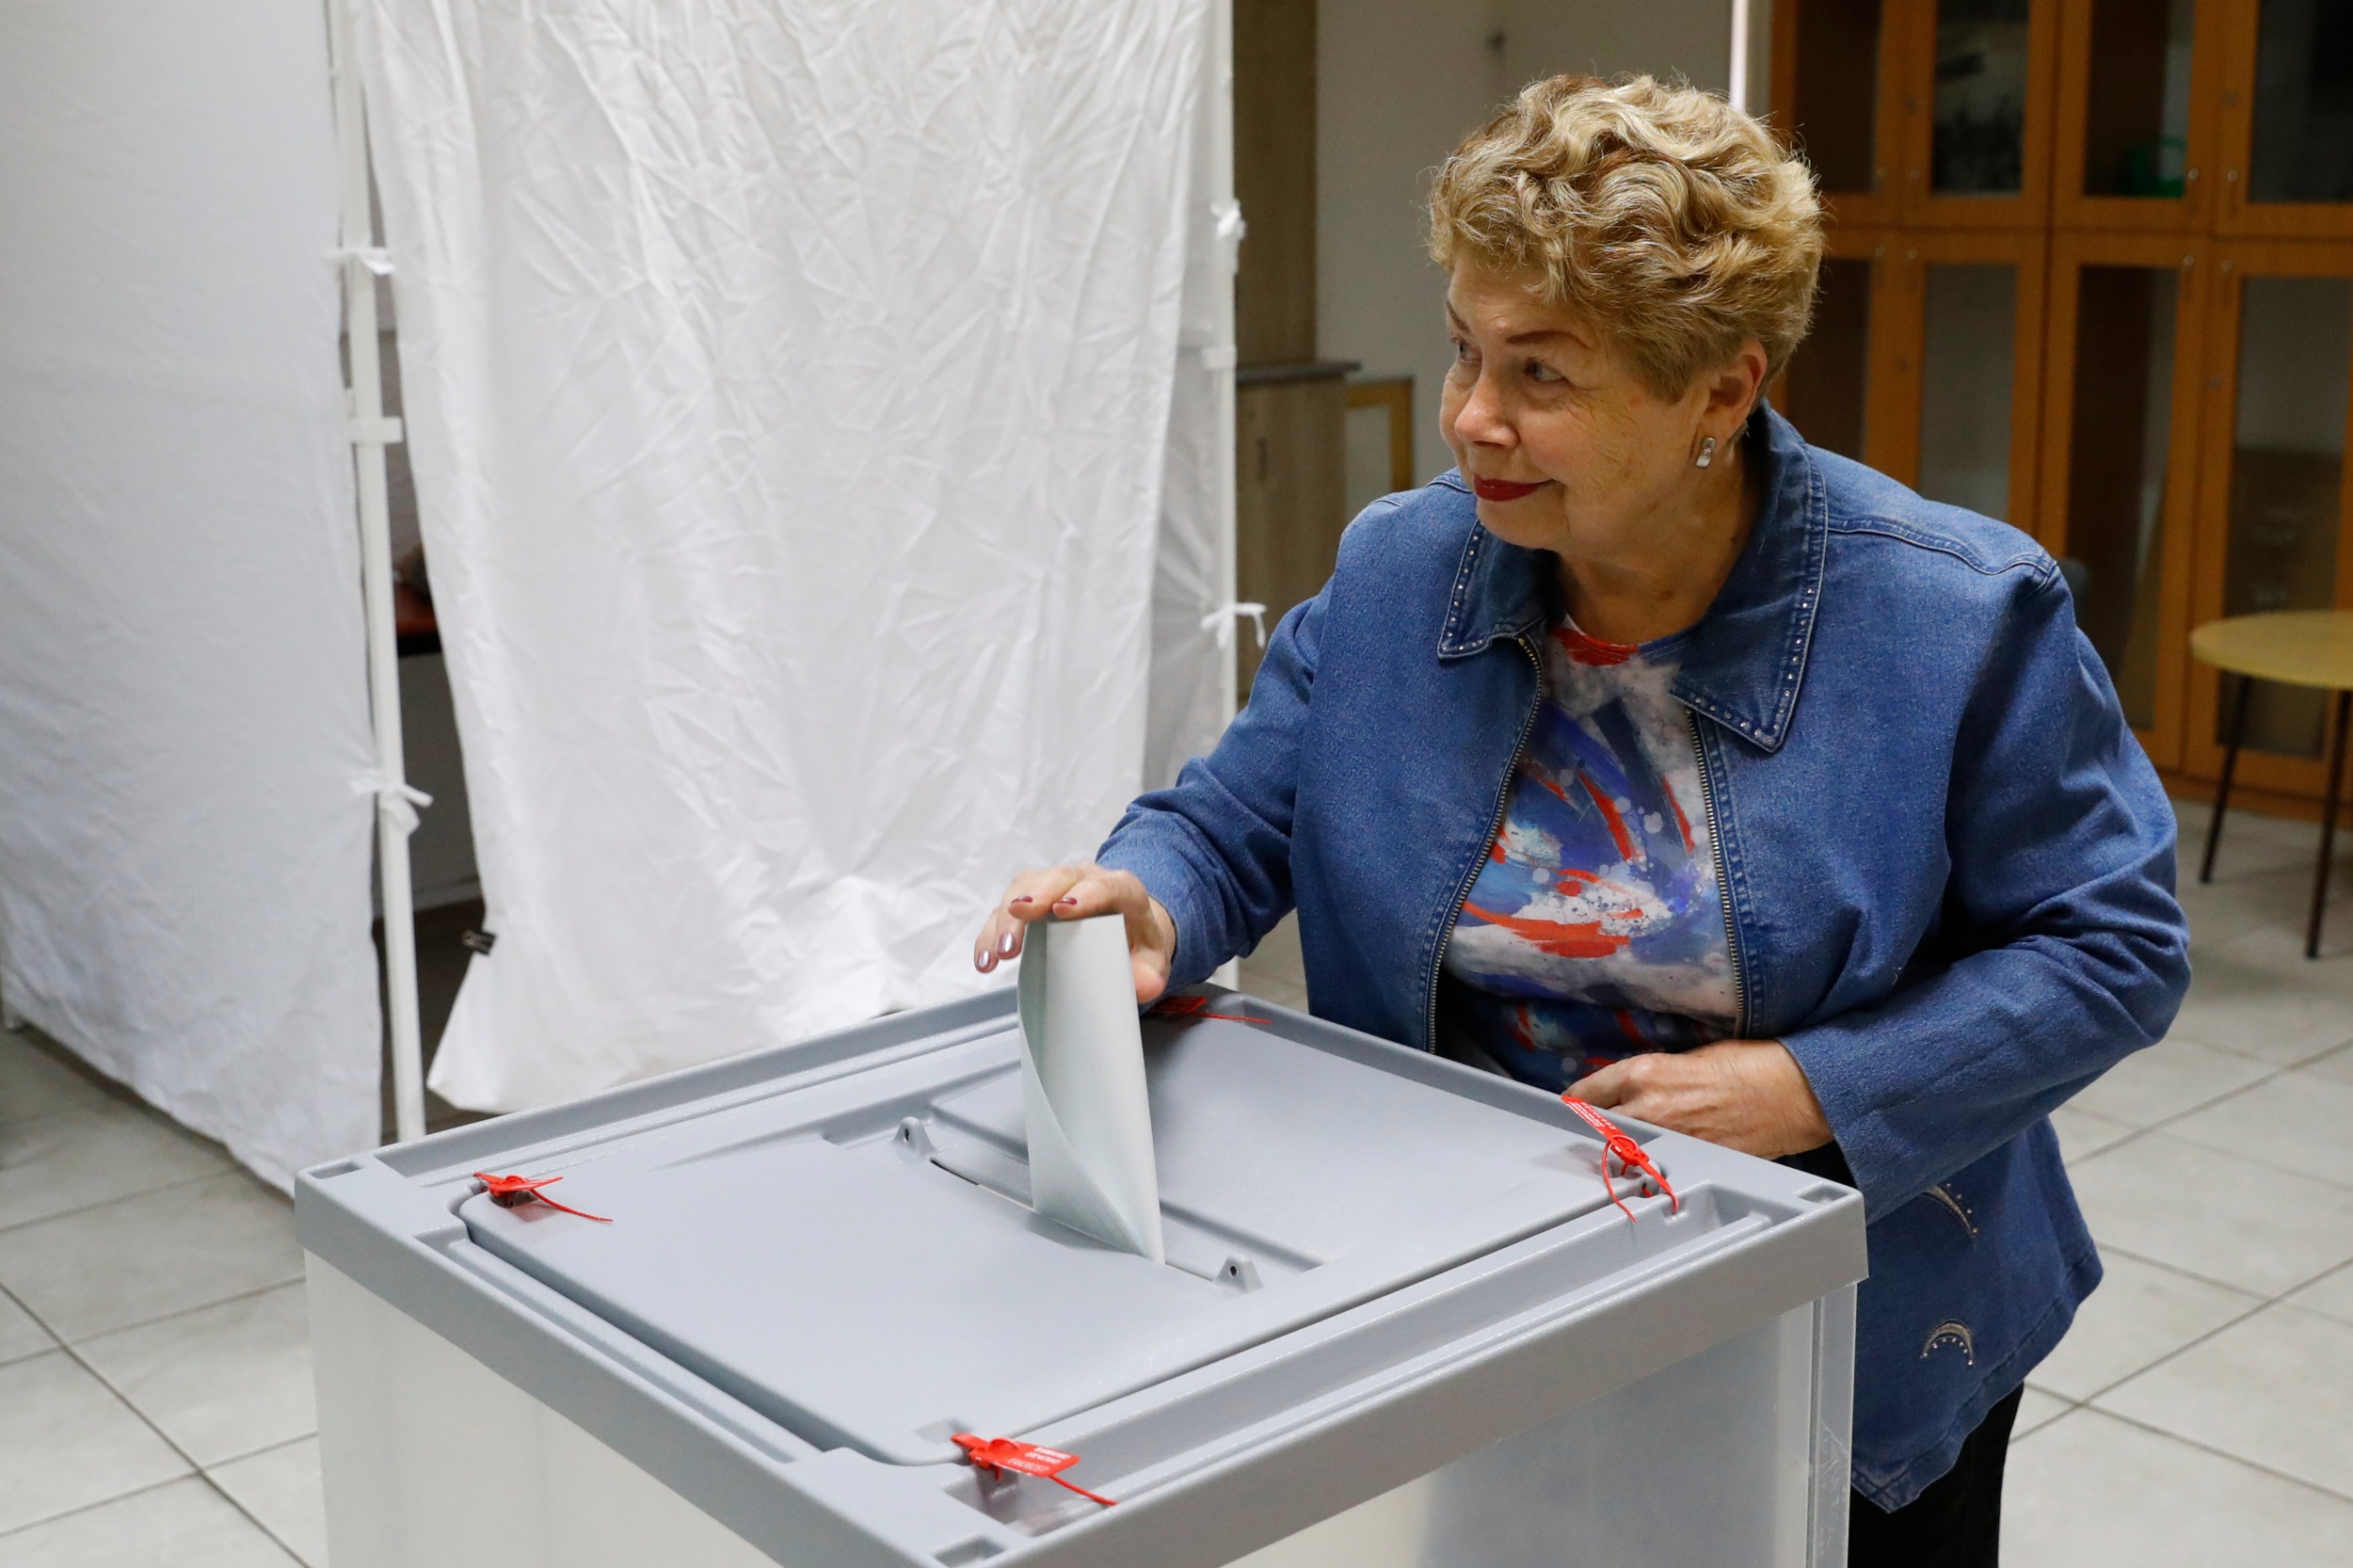 A Russian national residing in Israel casts her vote at a polling station in the coastal city of Netanya, during Russia's 2018 presidential election (AFP)